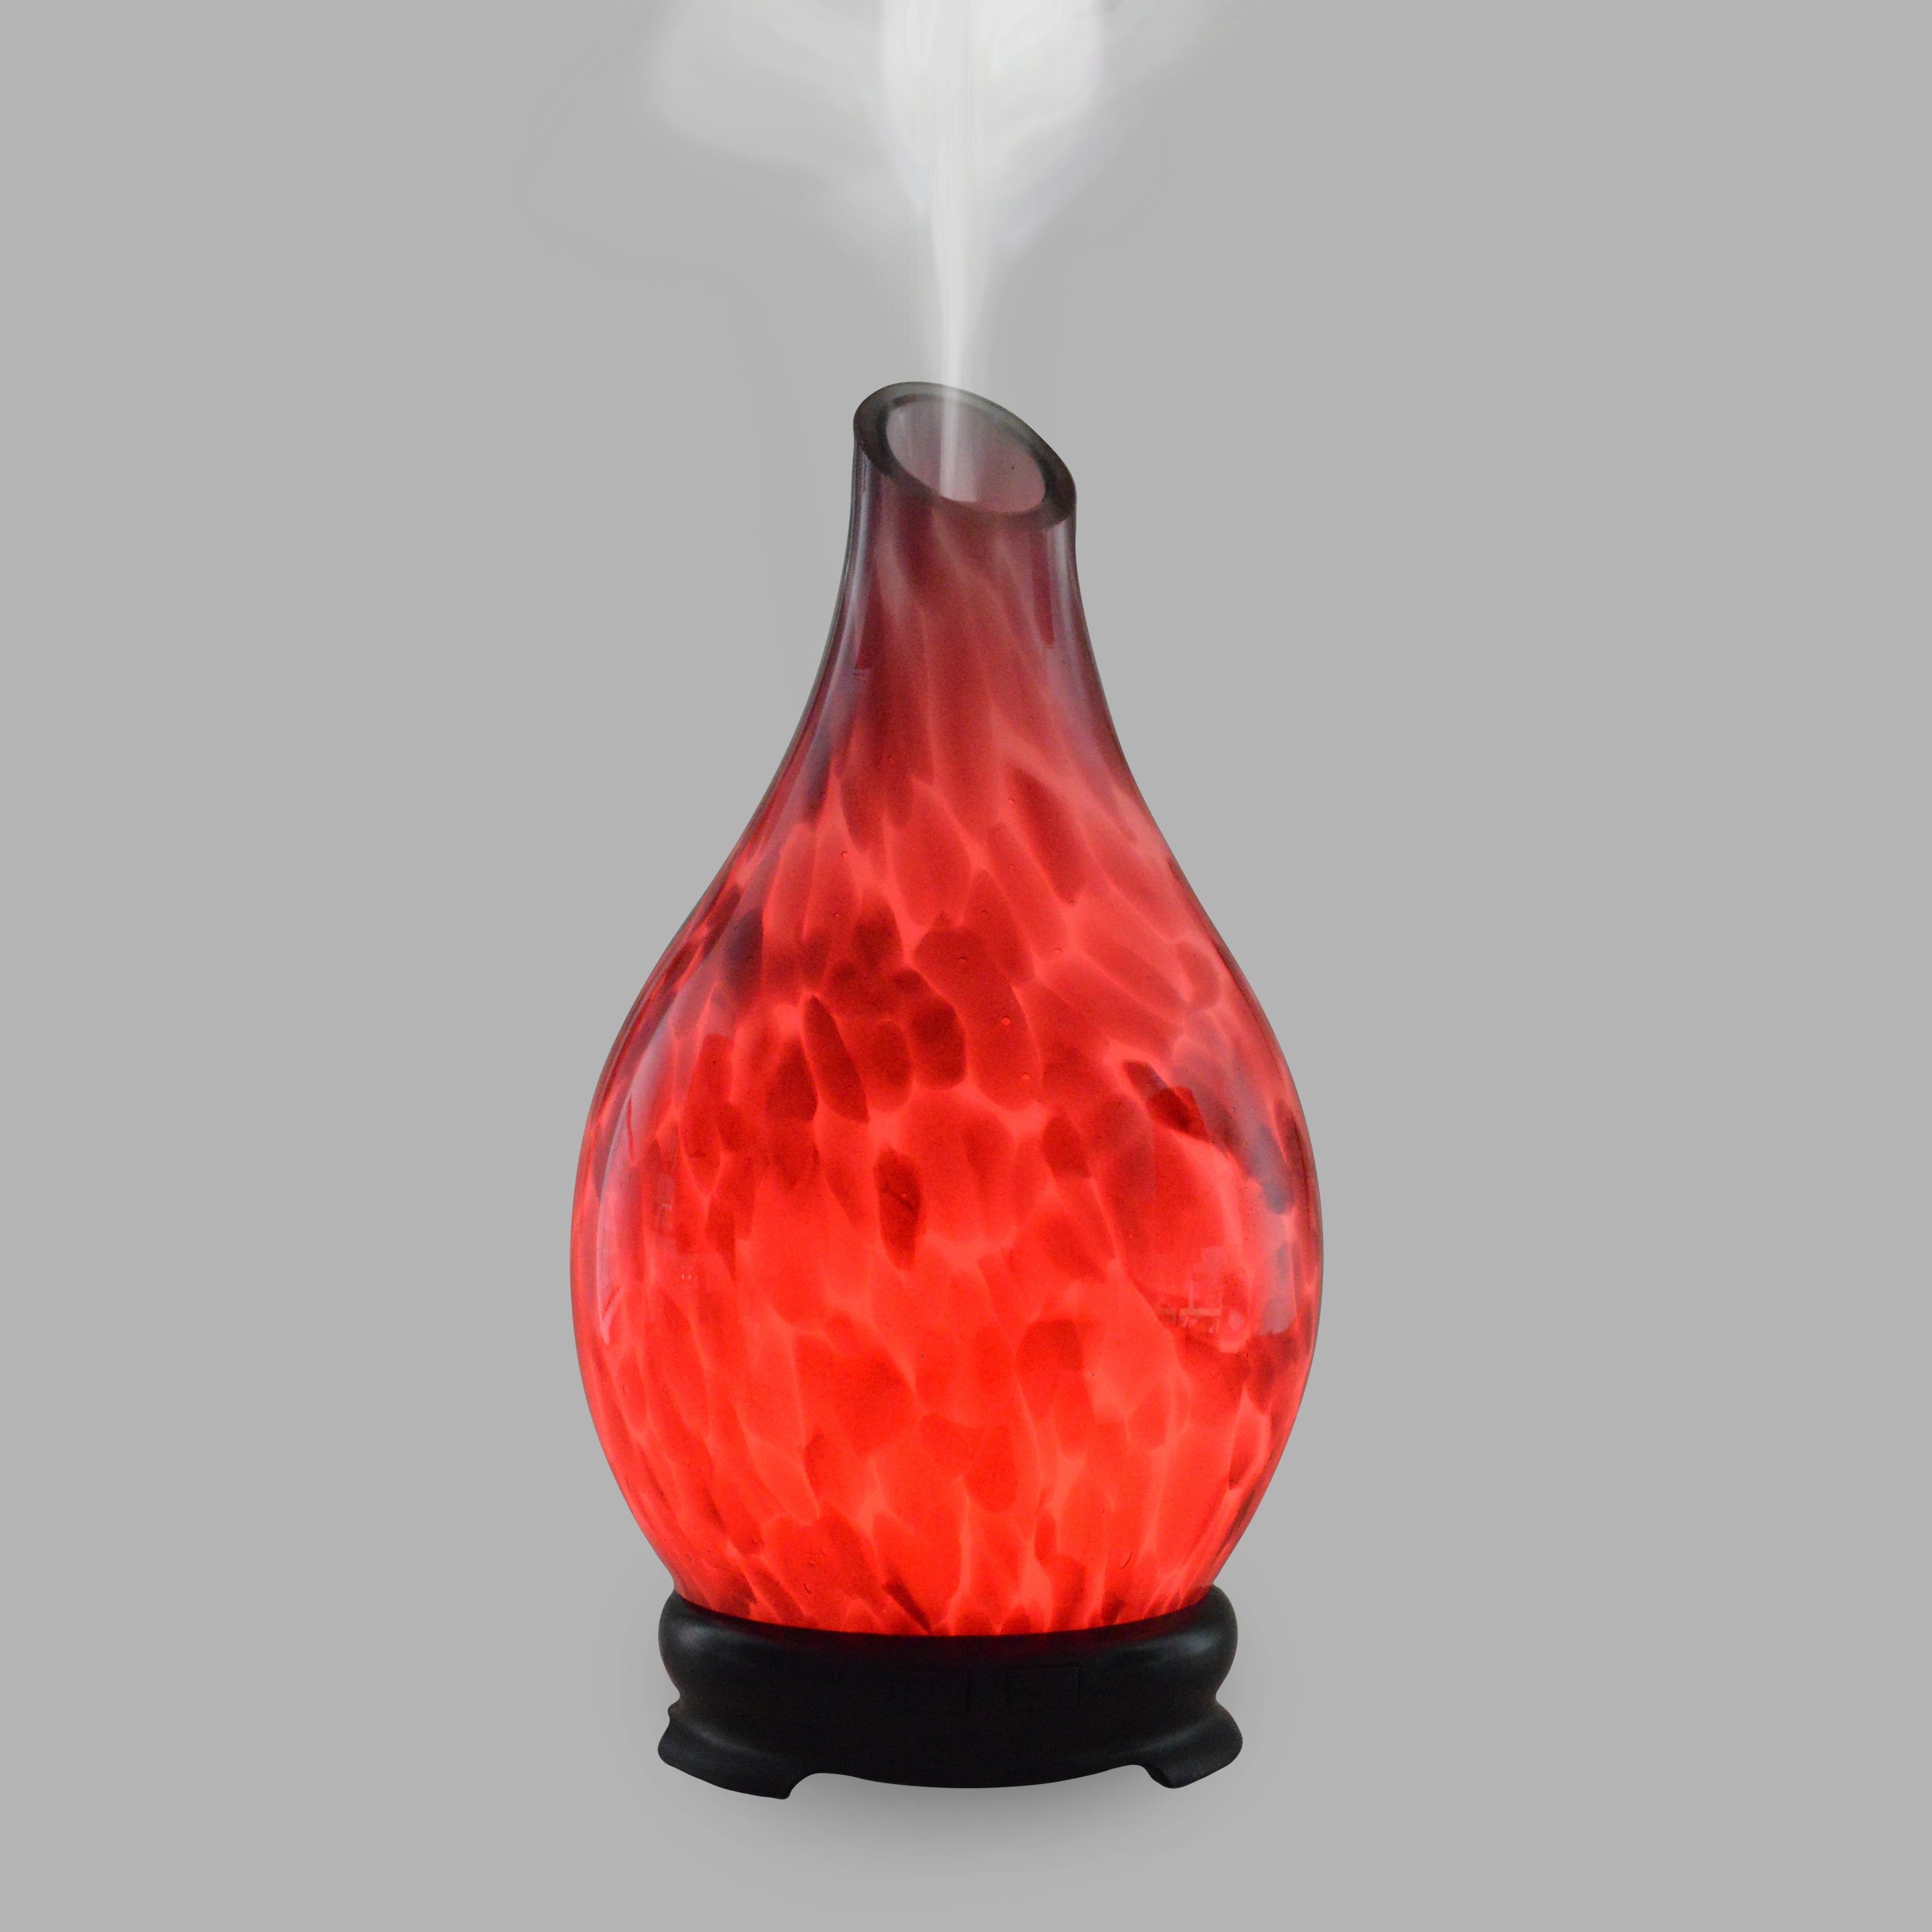 Bright and fiery, this striking red humidifier makes a statement in any room of your home.